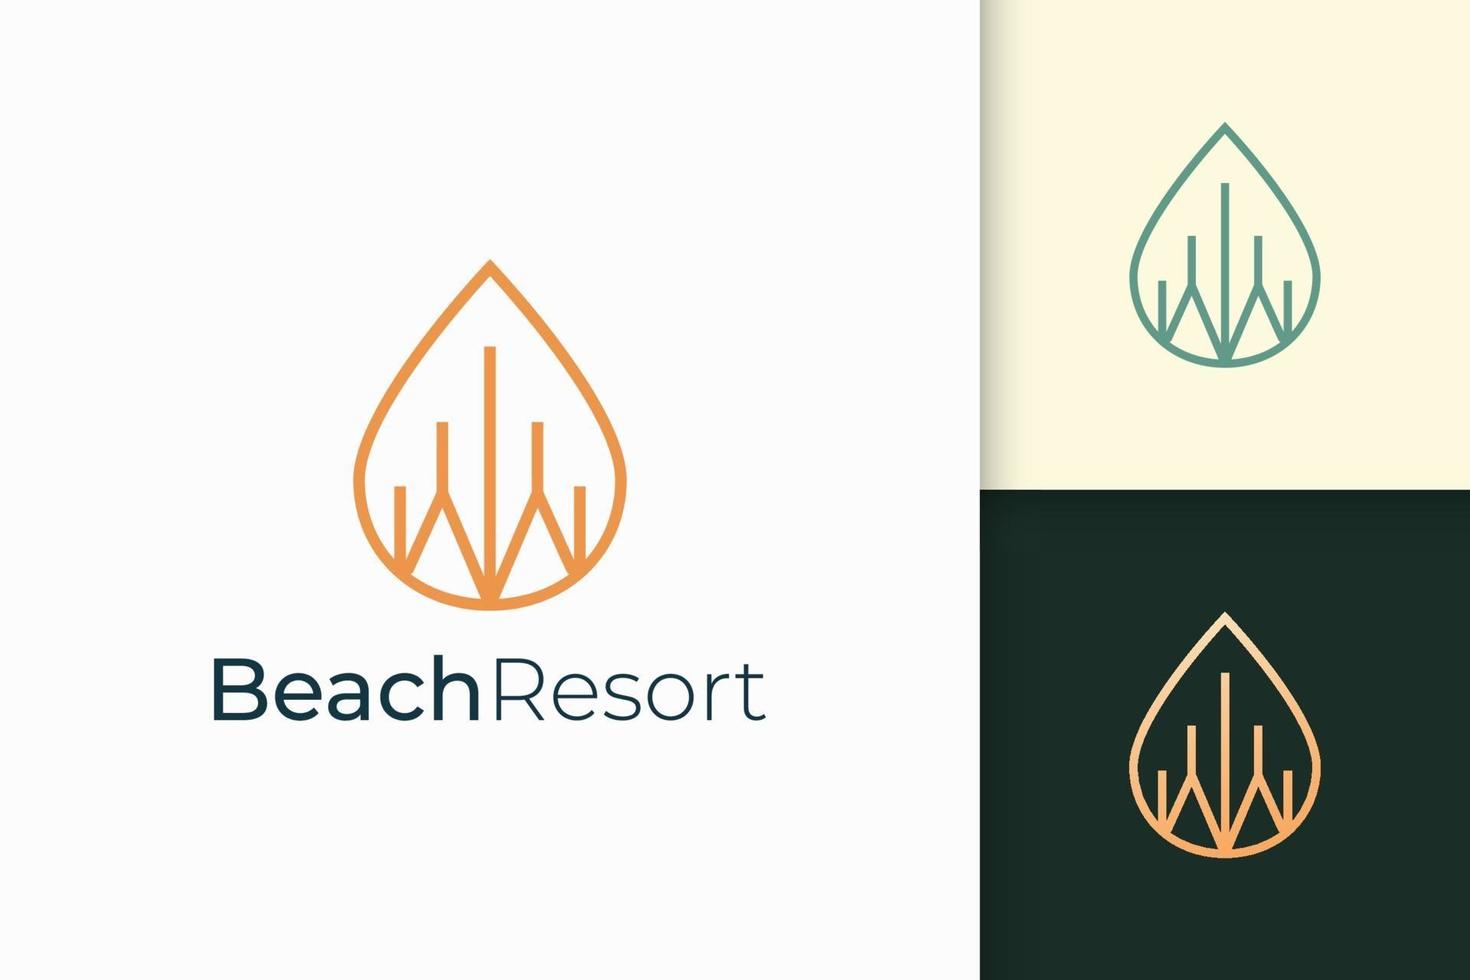 Waterfront apartment or property logo in simple line shape vector